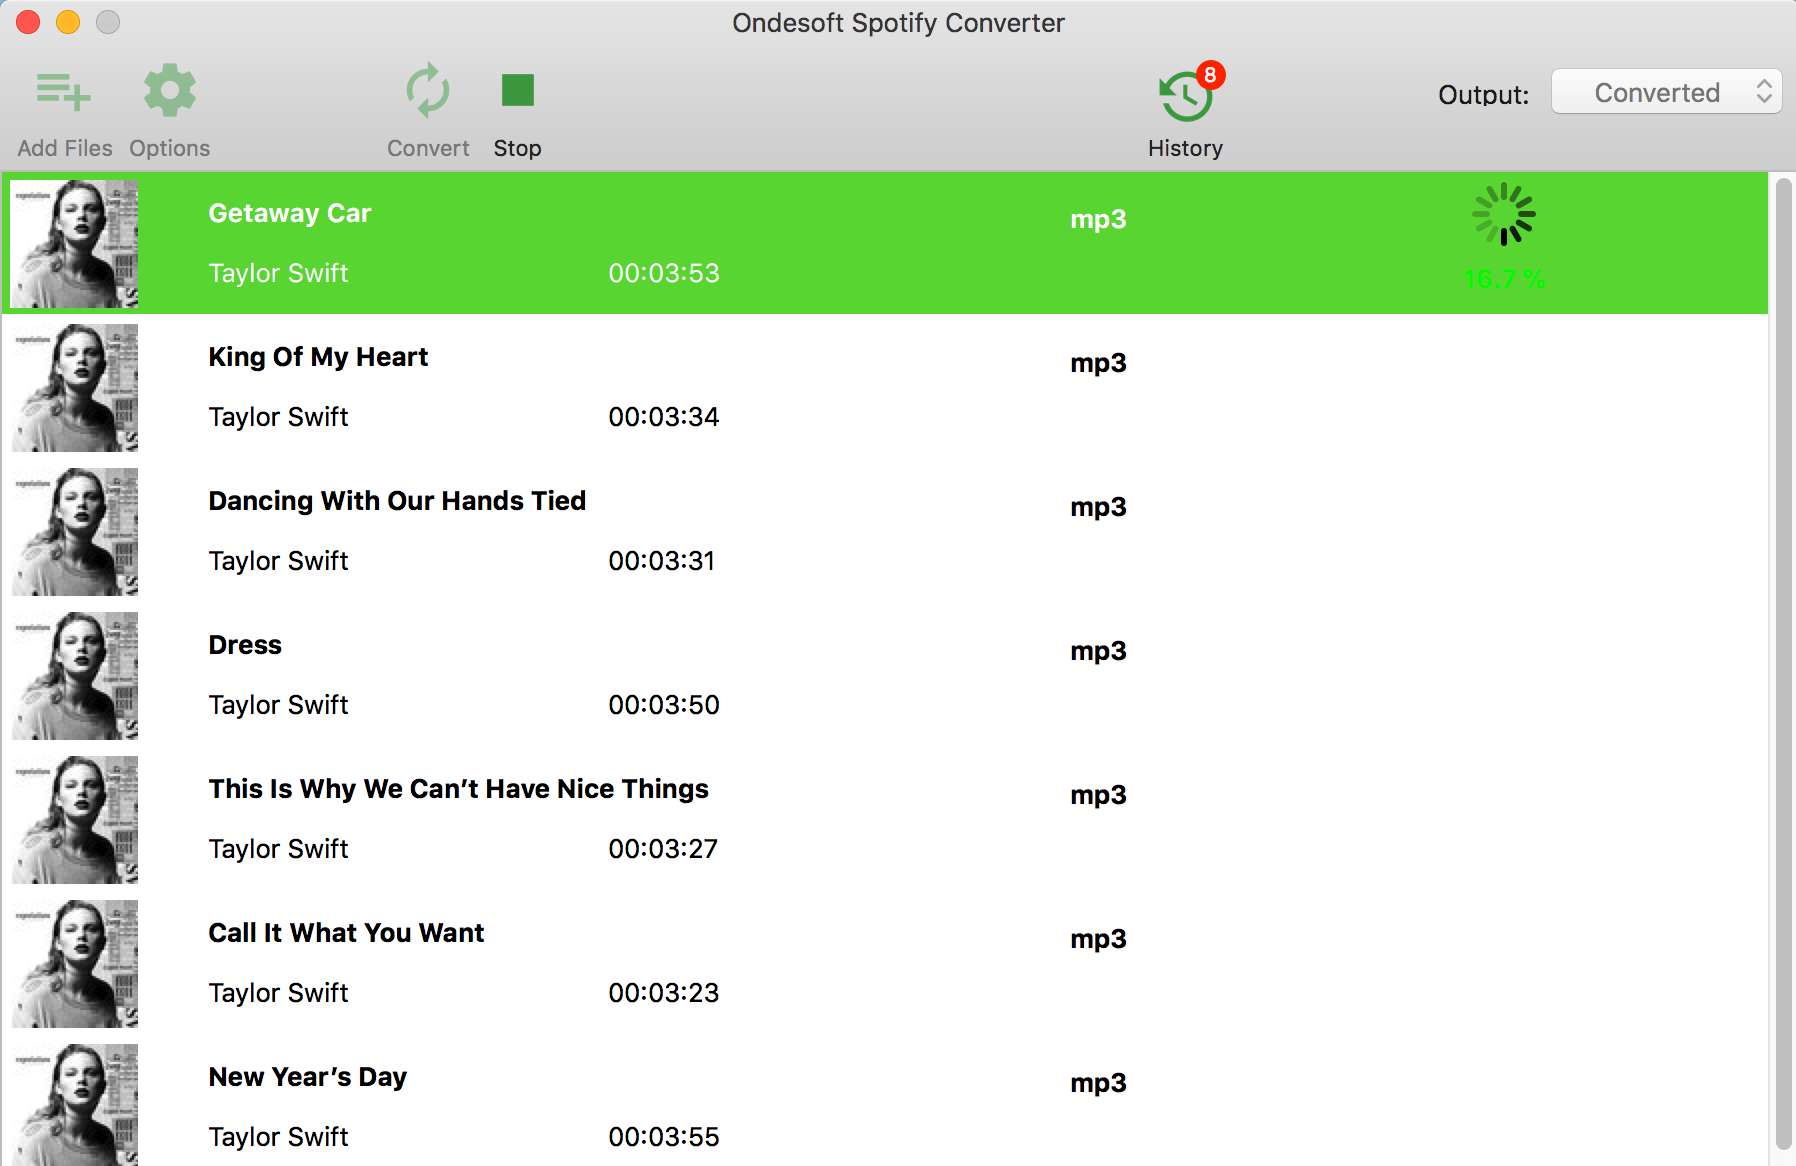 download Spotify music as mp3